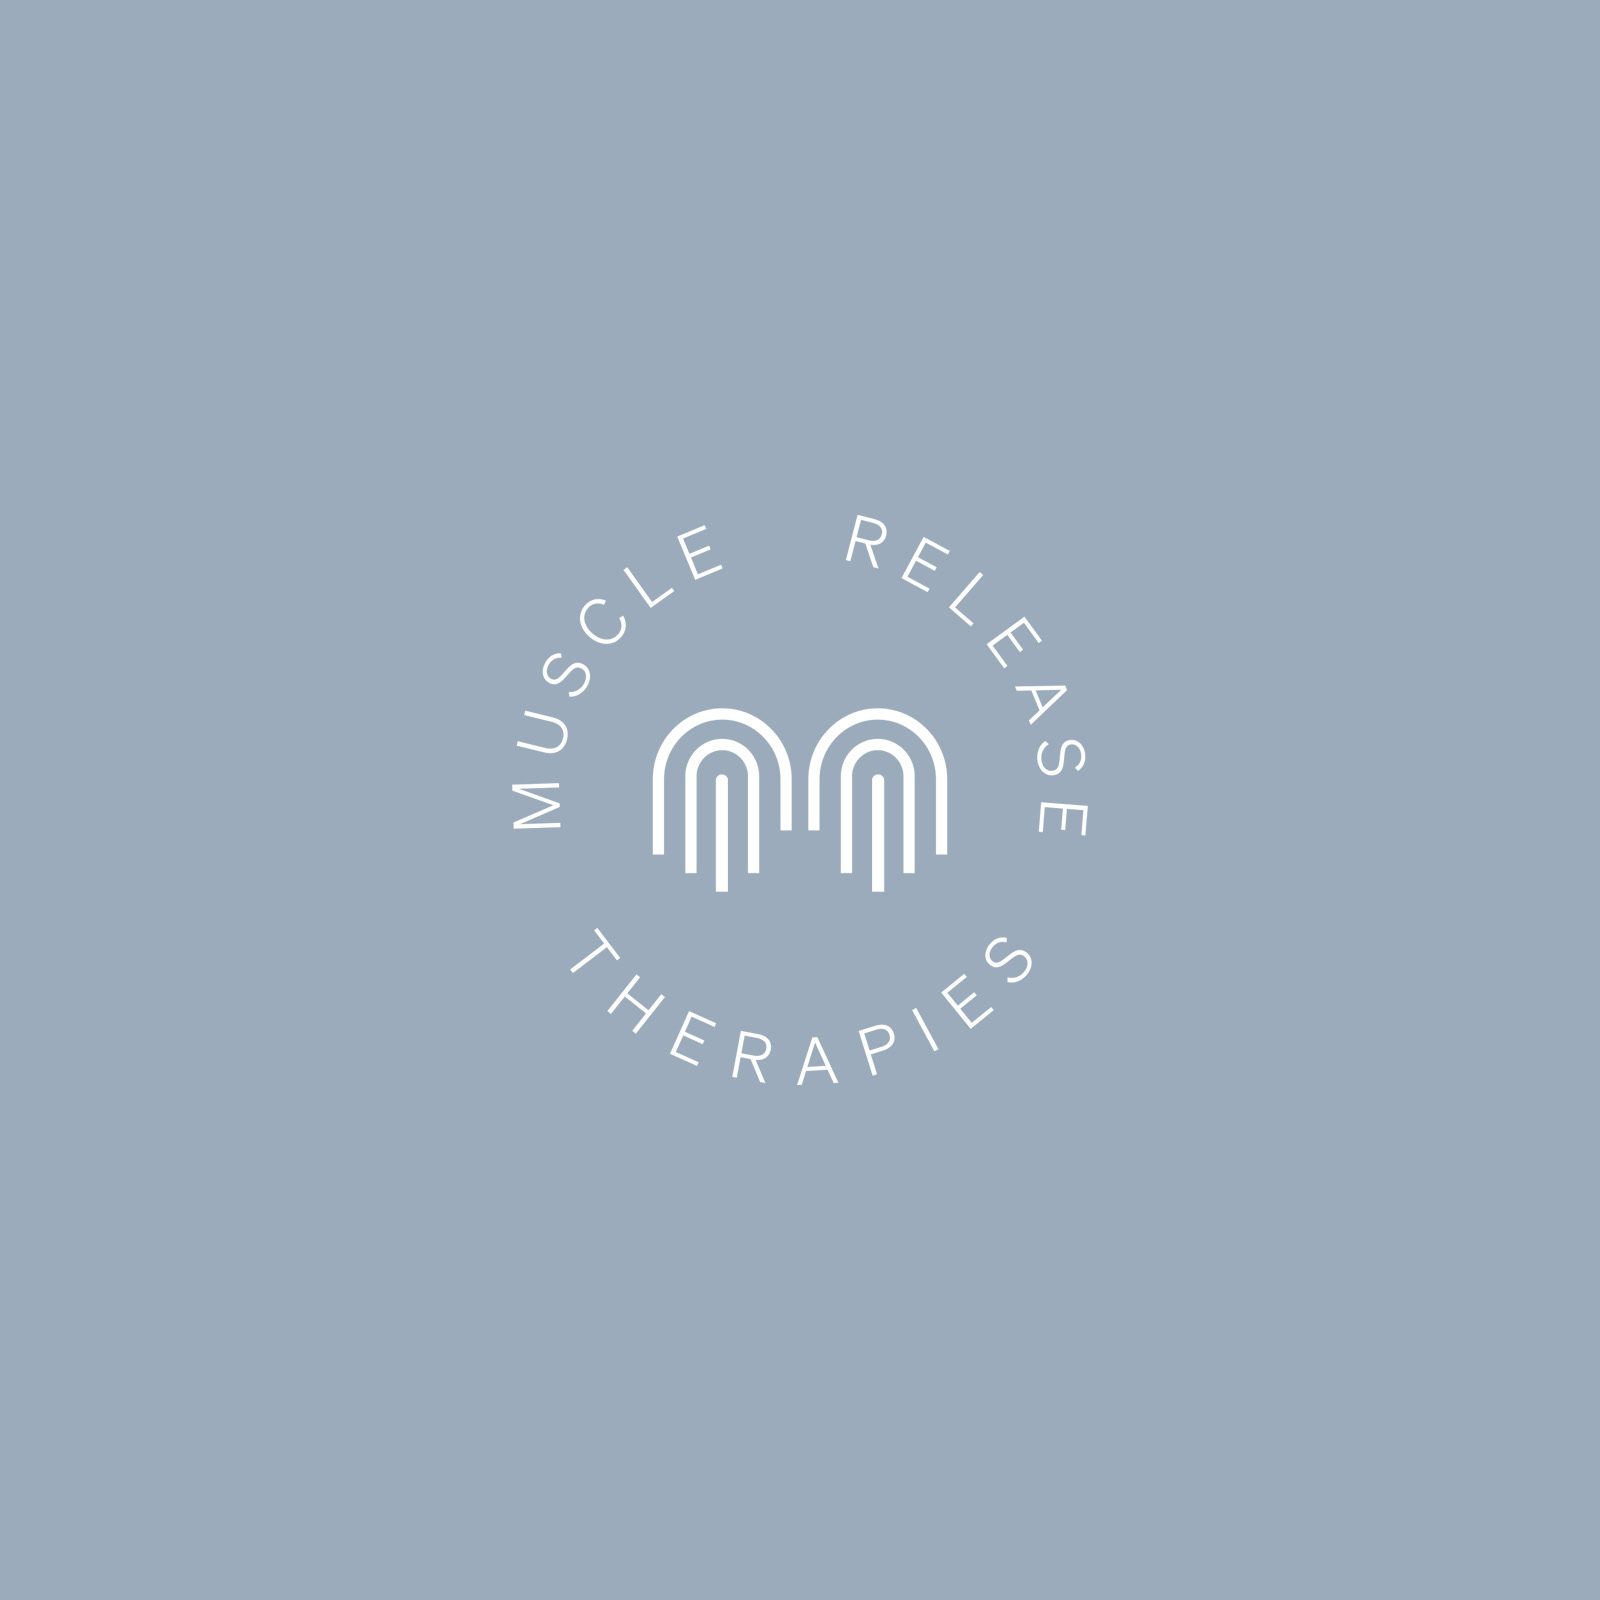 Muscle Release Therapies visual identity | branding by Leysa Flores Design